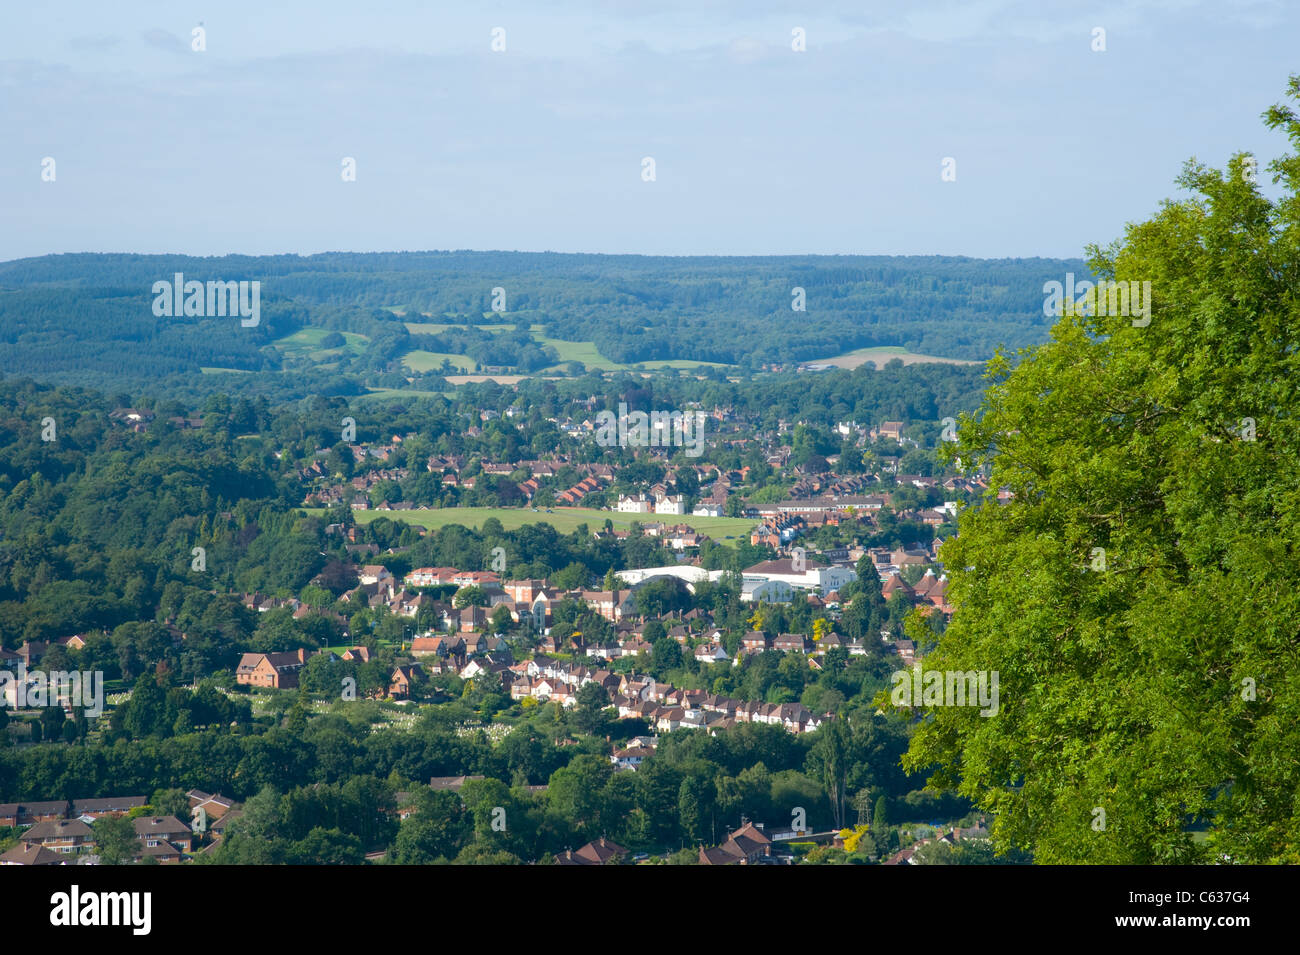 The National Trust Box HIll in Dorking, Surrey. Surrey Hills. Cycling event of 2012 London Olympics, Early summer morning Stock Photo